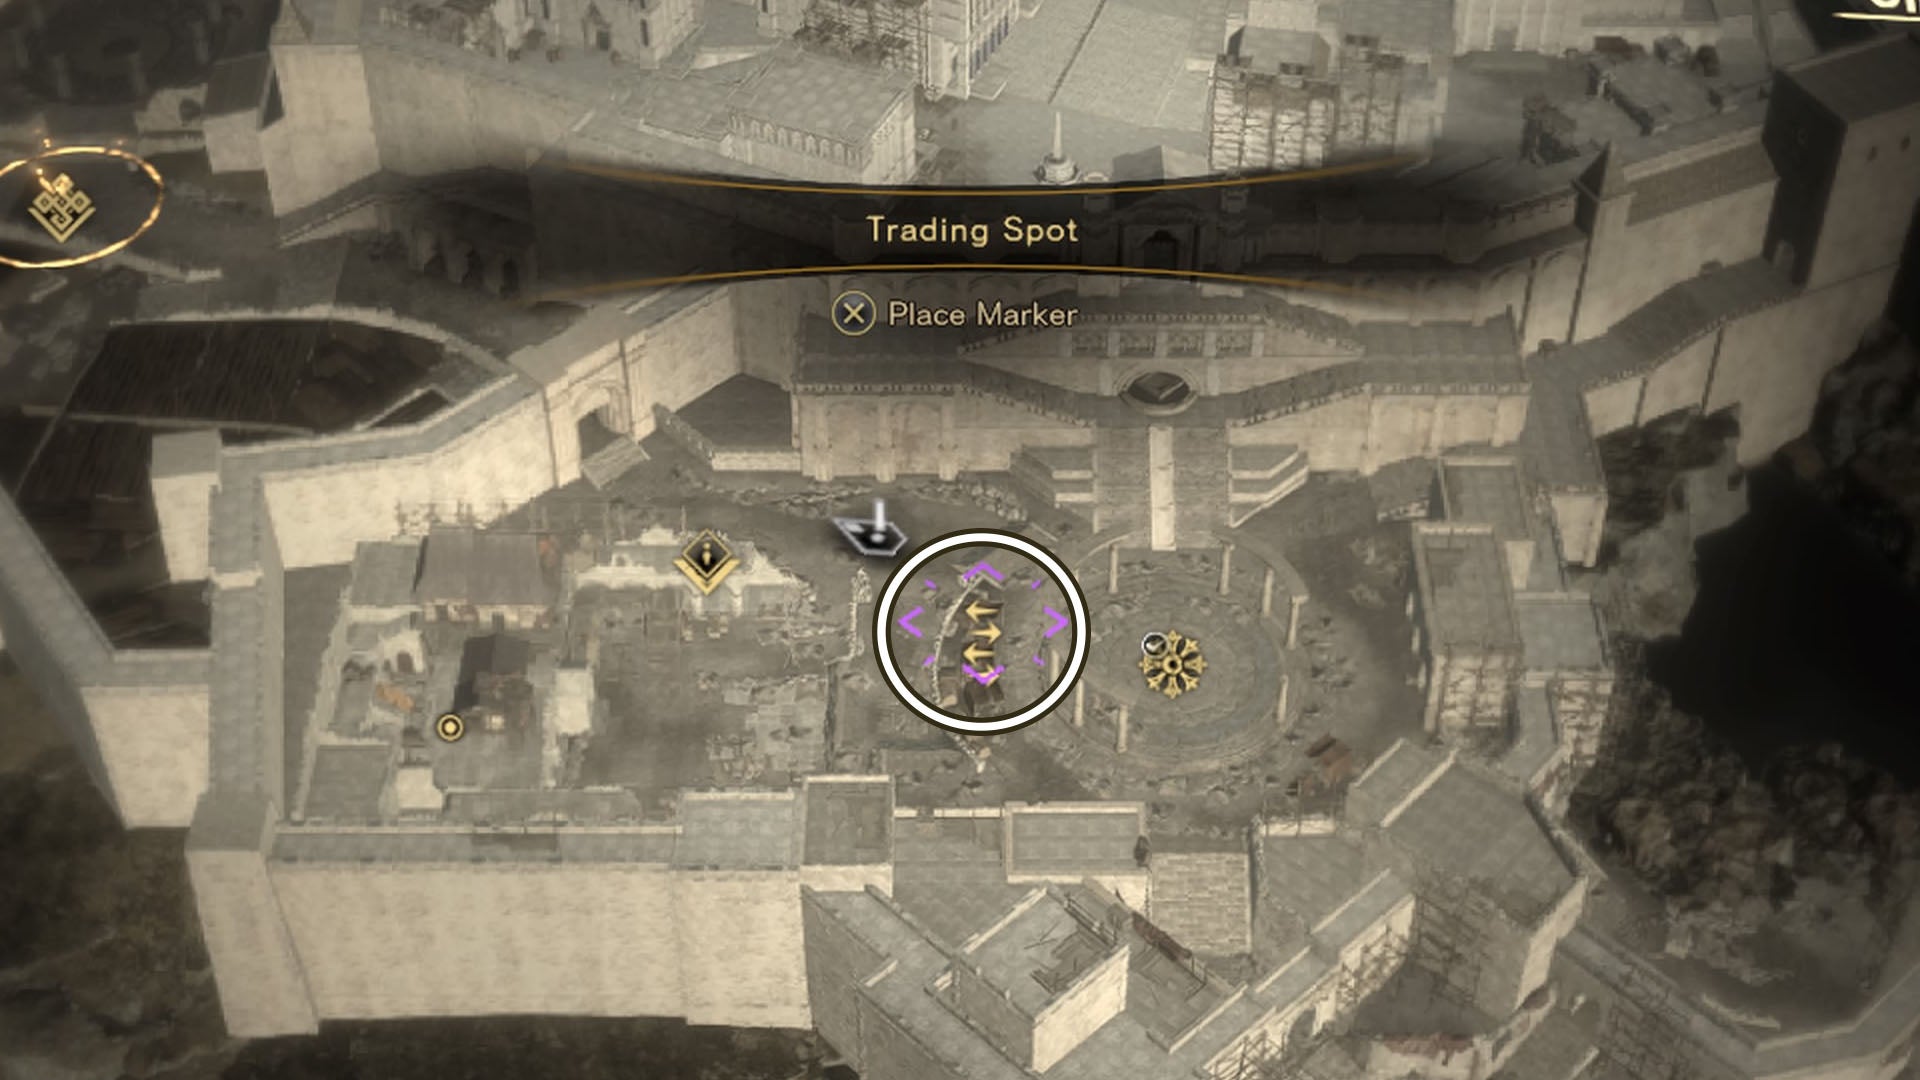 Forspoken, the Trader icon on a close-up map has been circled